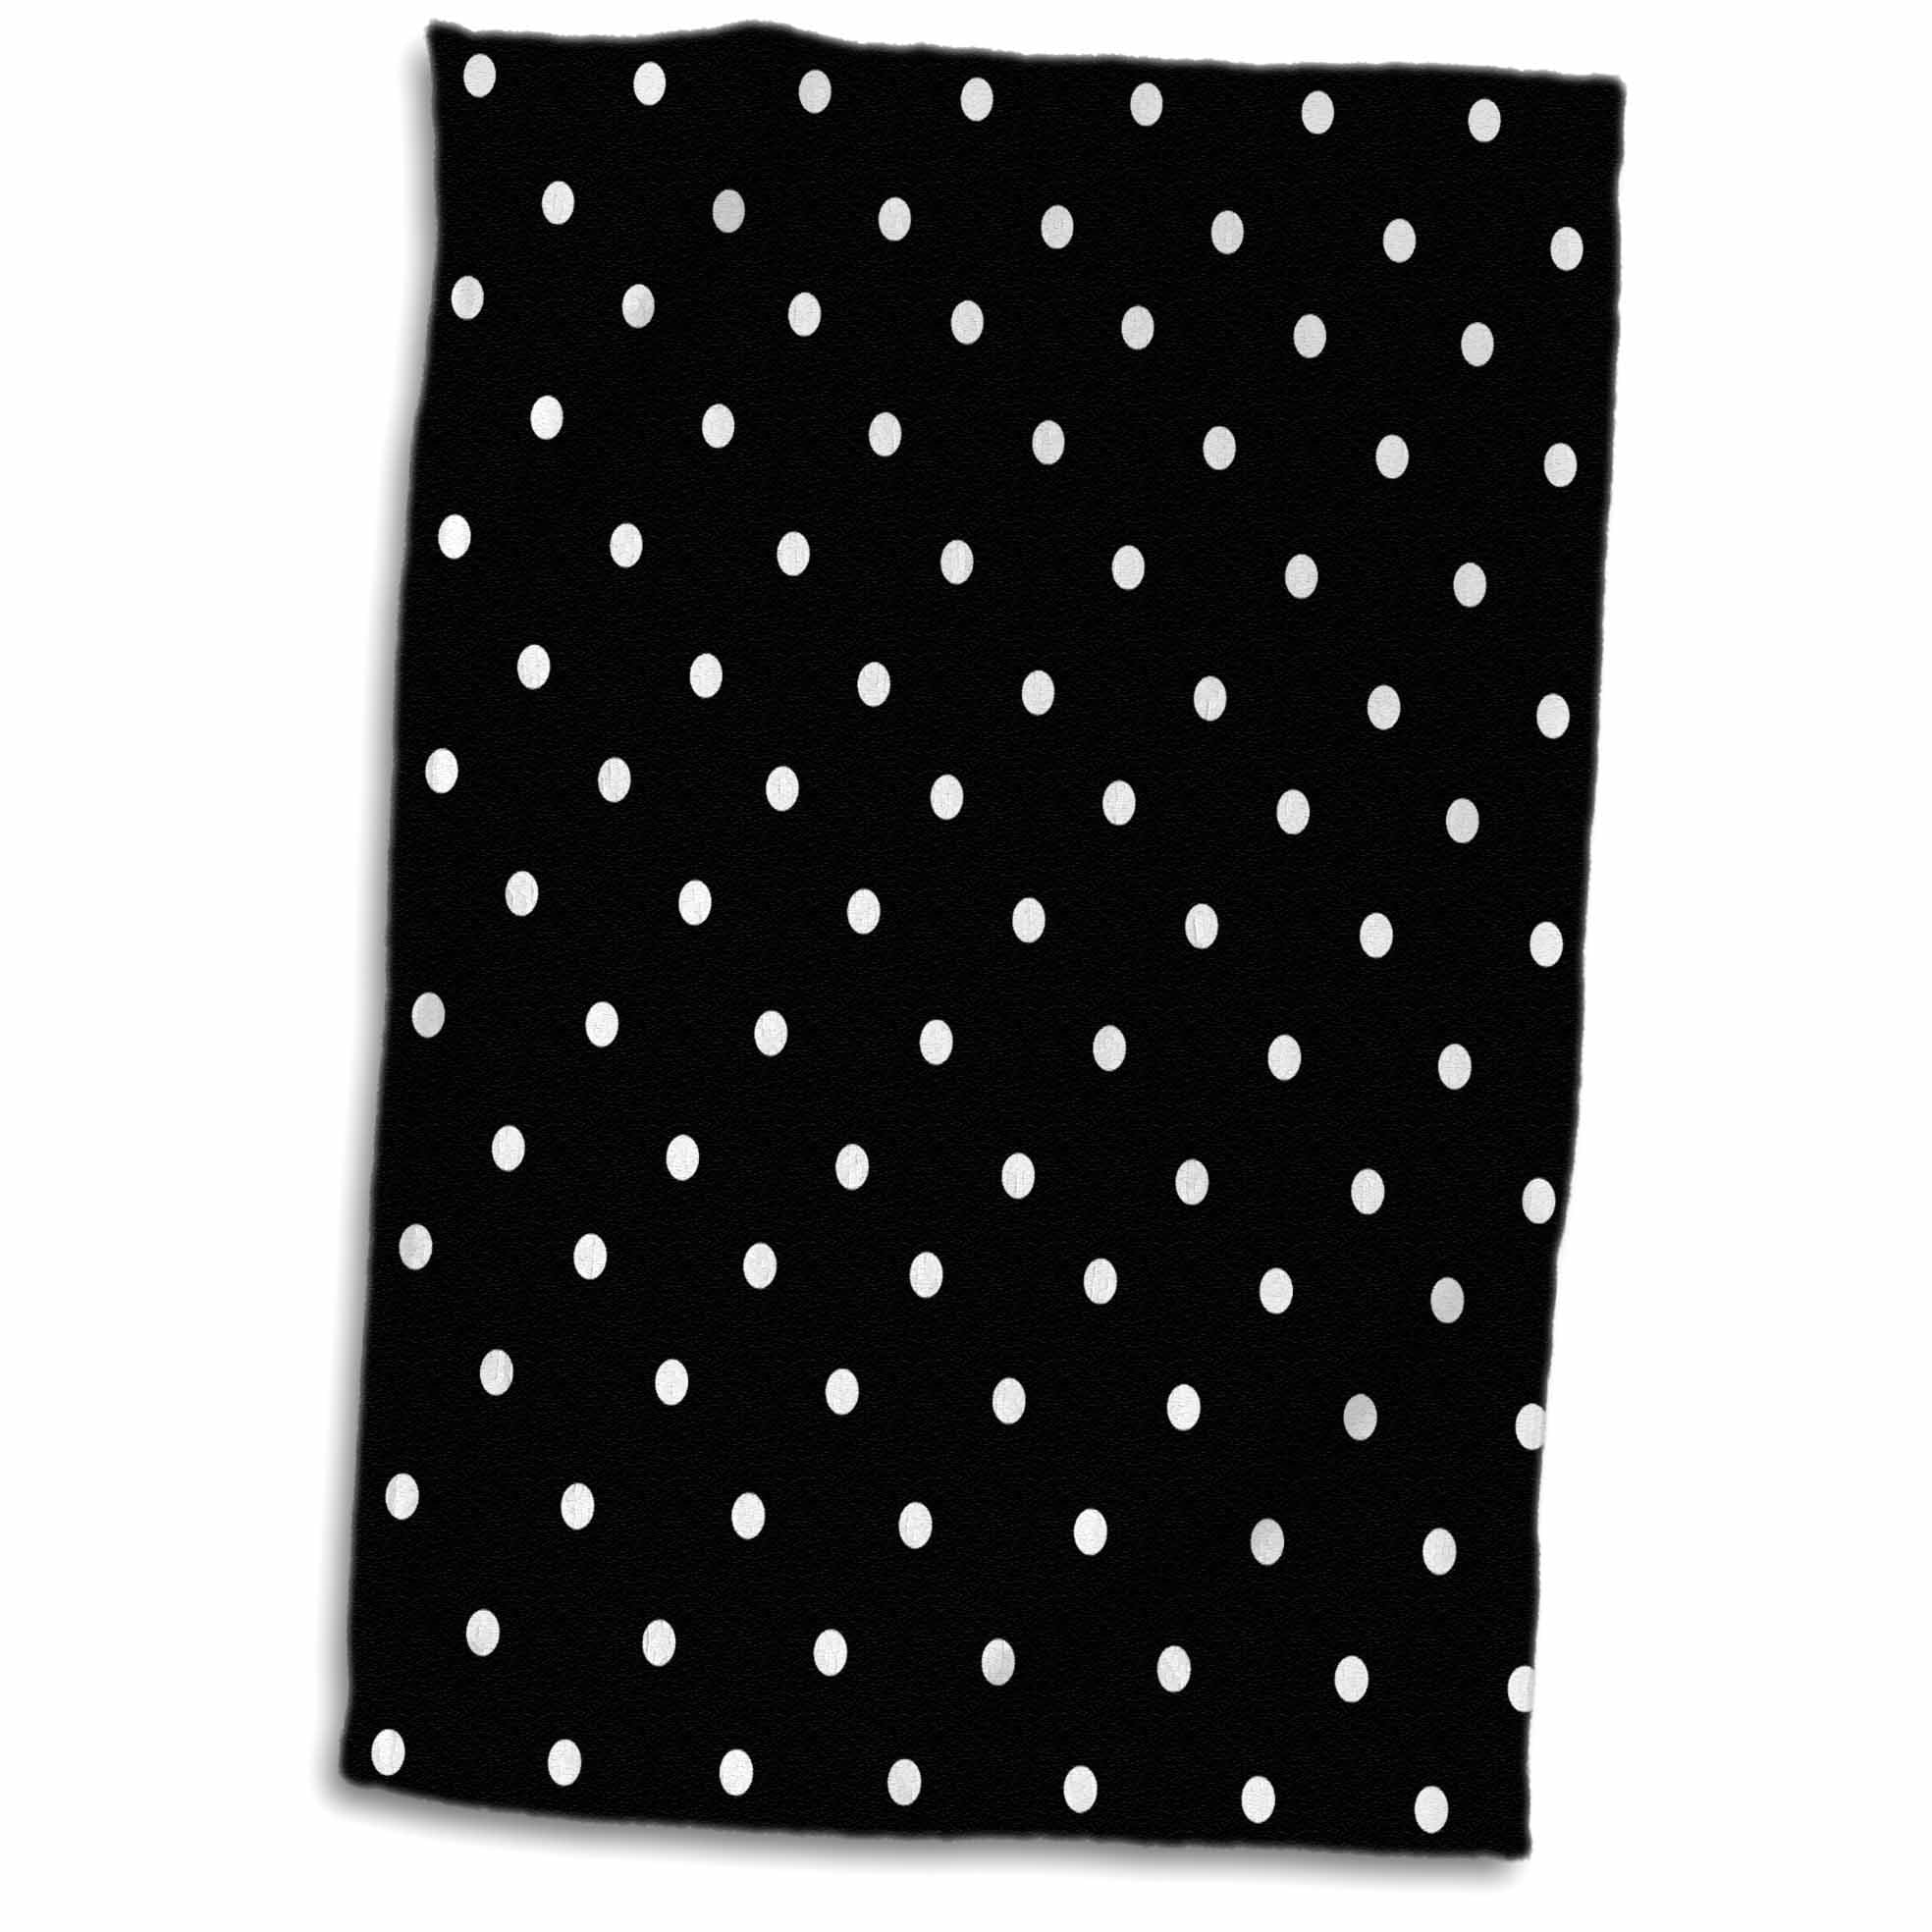 3D Rose Polka Pattern-Little White Dots On Bright Green-Classic Delicate Spots-Dotty Spotty Hand/Sports Towel 15 x 22 Multicolor 